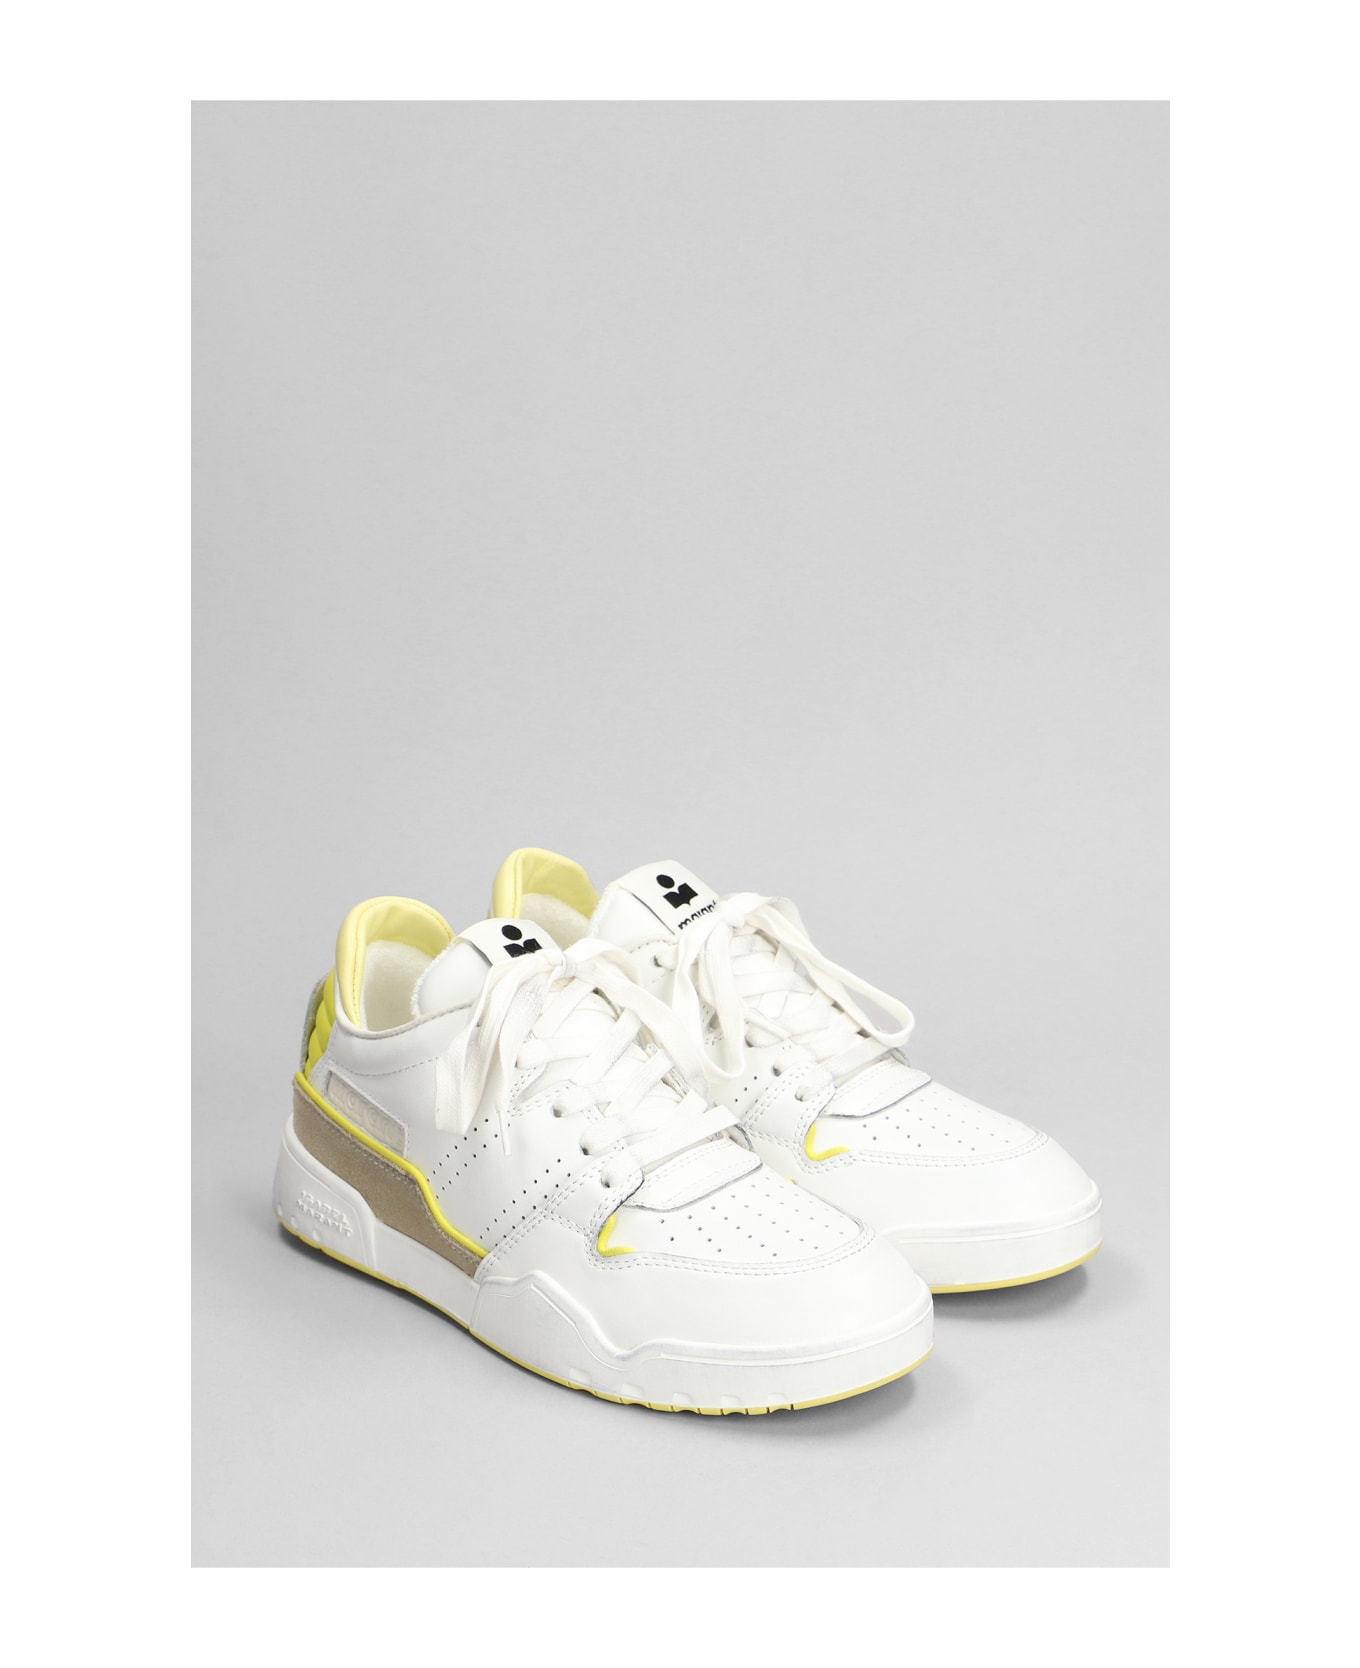 Isabel Marant Emree Sneakers In White Suede And Leather - Liye Light Yellow